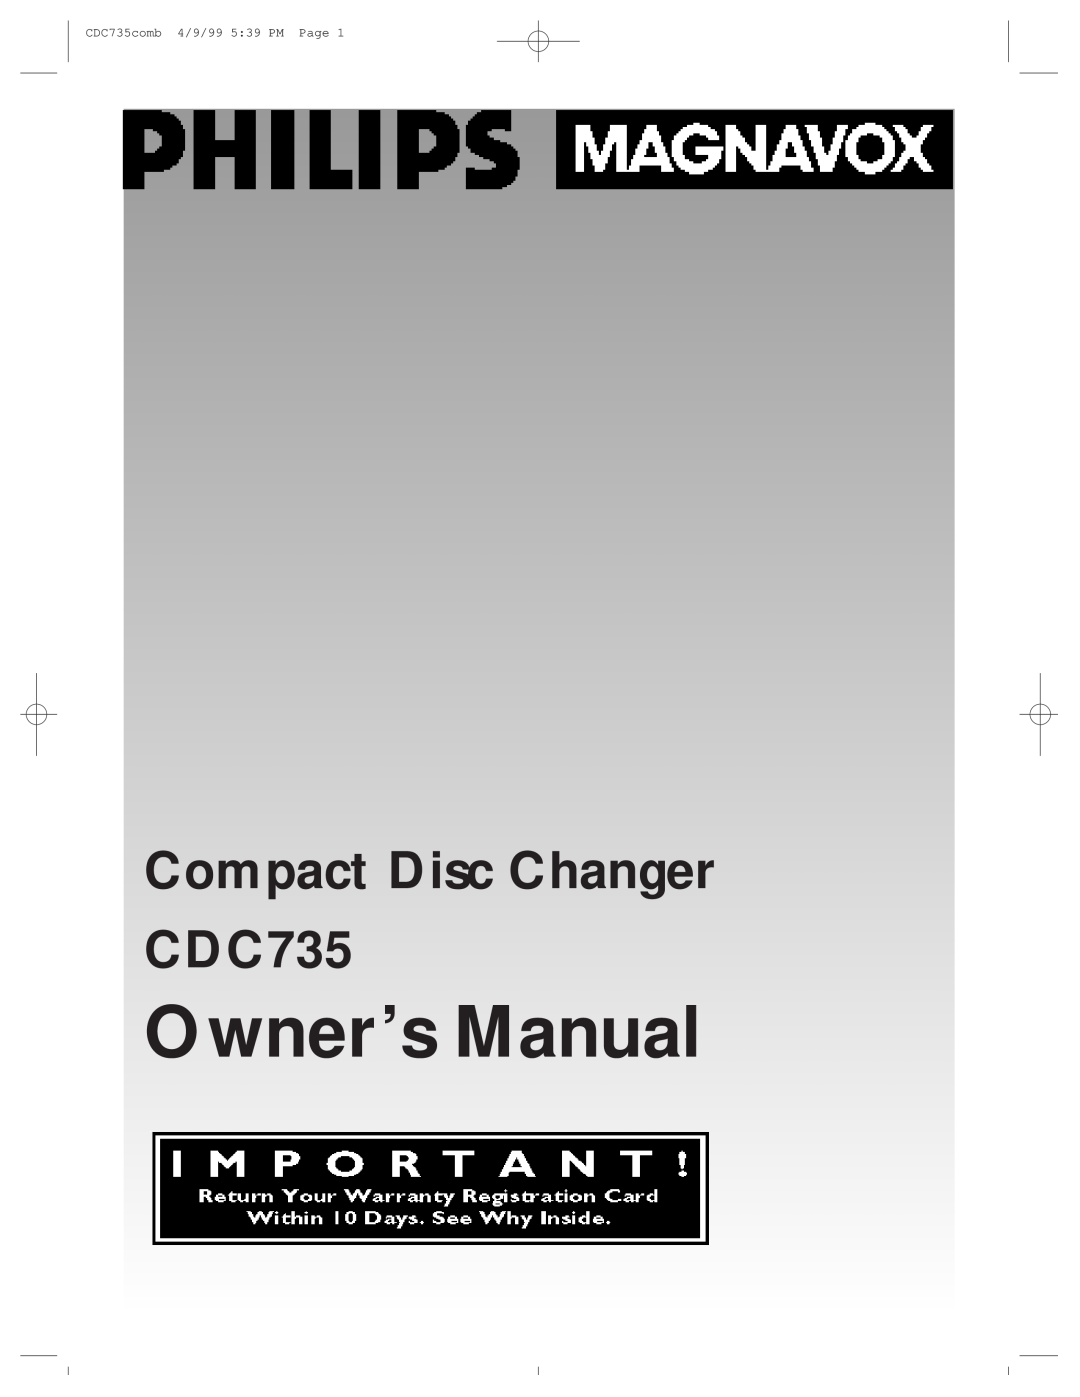 Philips owner manual Compact Disc Changer CDC735, CDC735comb 4/9/99 5 39 PM Page 